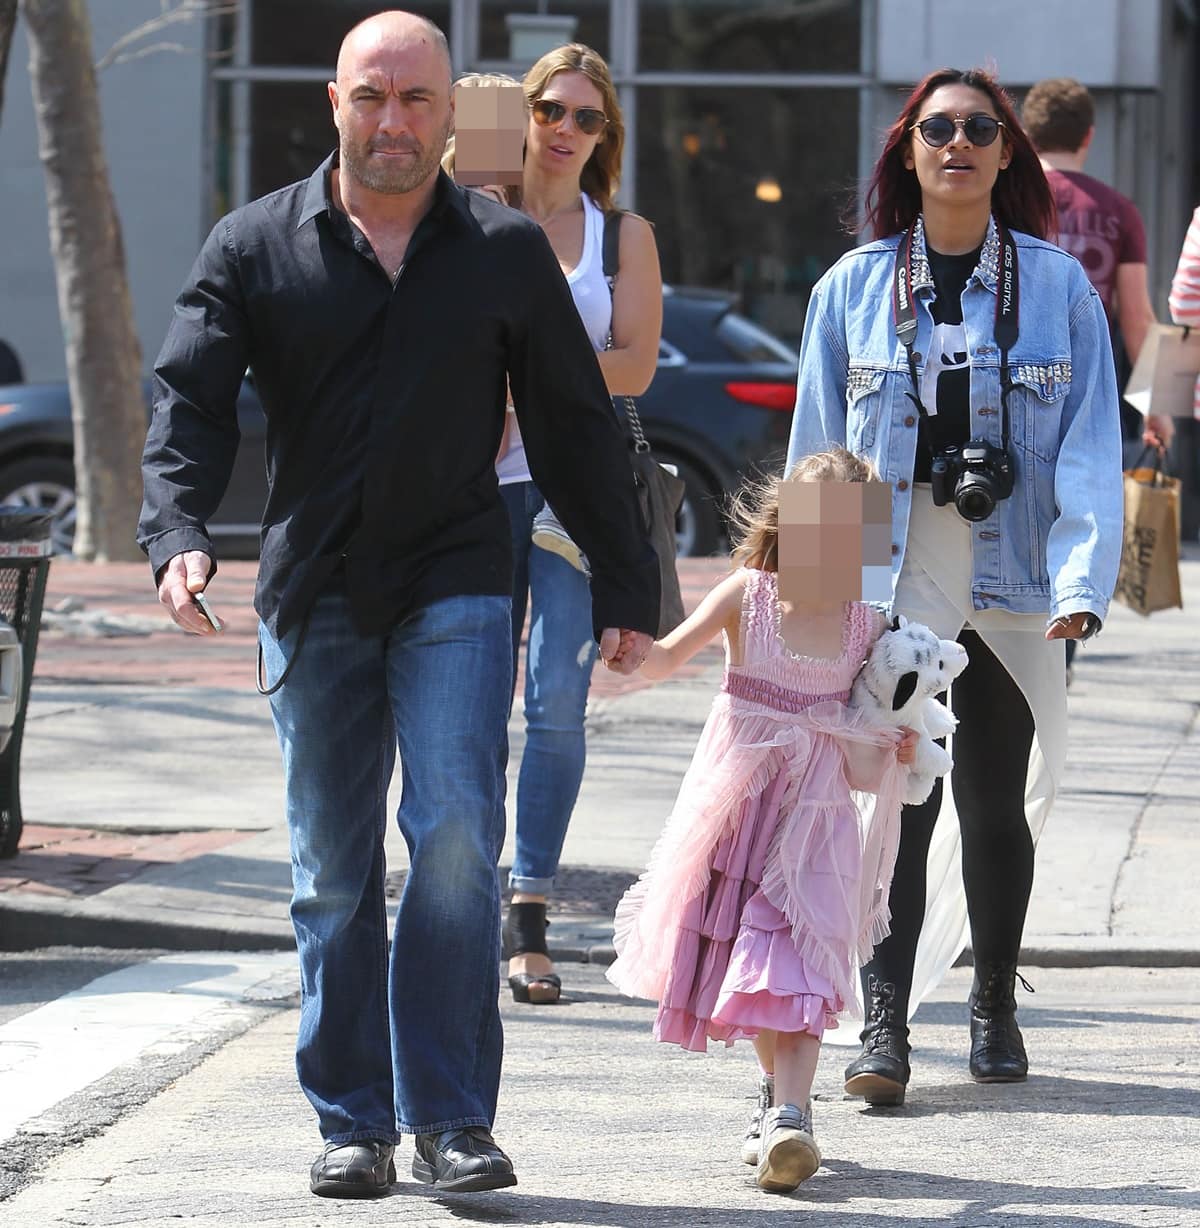 Joe Rogan is seen taking a walk with his wife, Jessica Rogan, and daughters in Soho